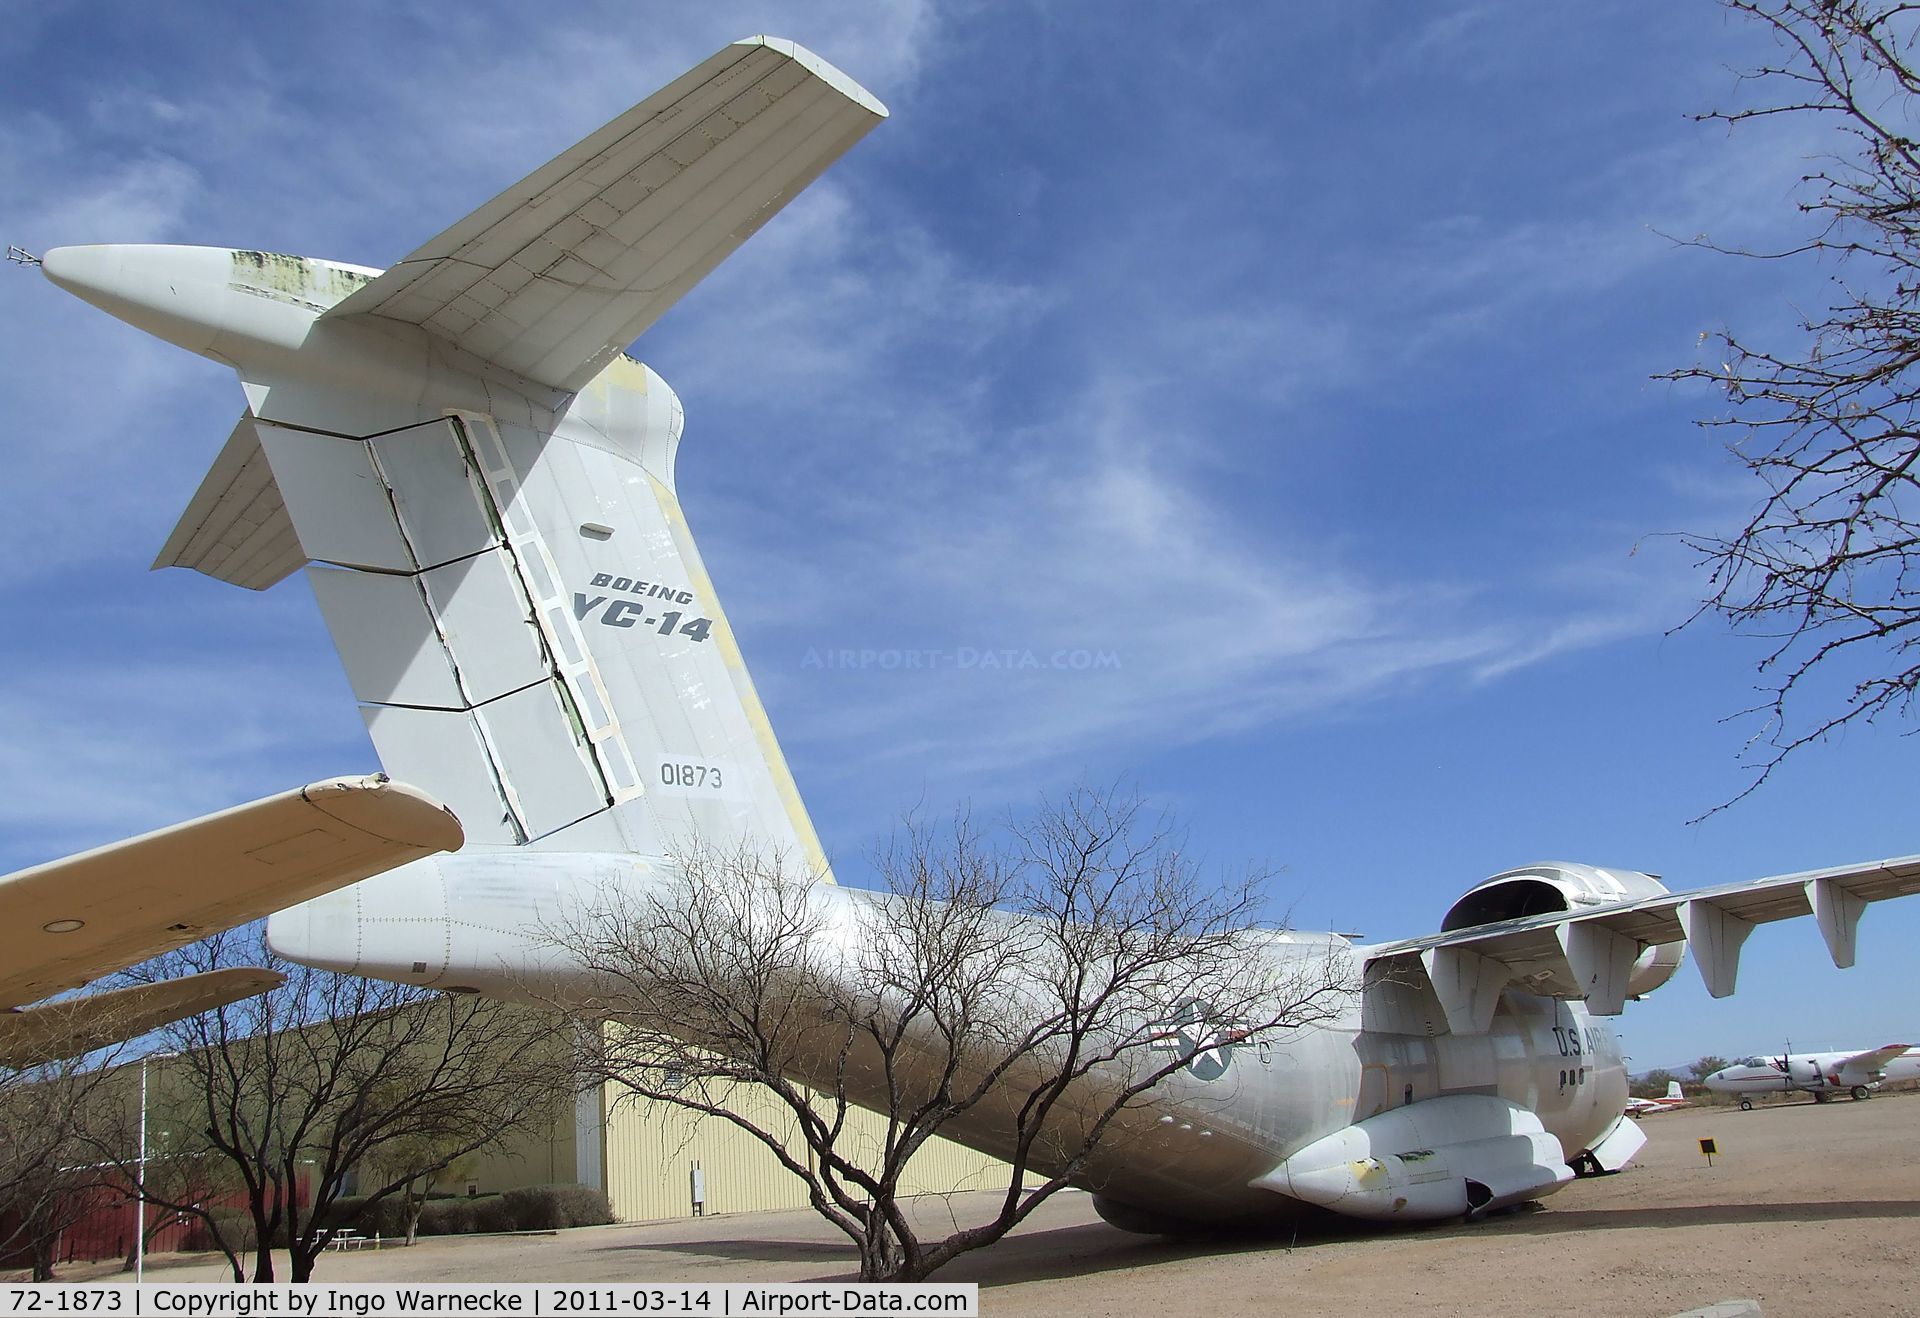 72-1873, 1972 Boeing YC-14A-BN C/N P 1, Boeing YC-14A (engines sadly still missing) at the Pima Air & Space Museum, Tucson AZ